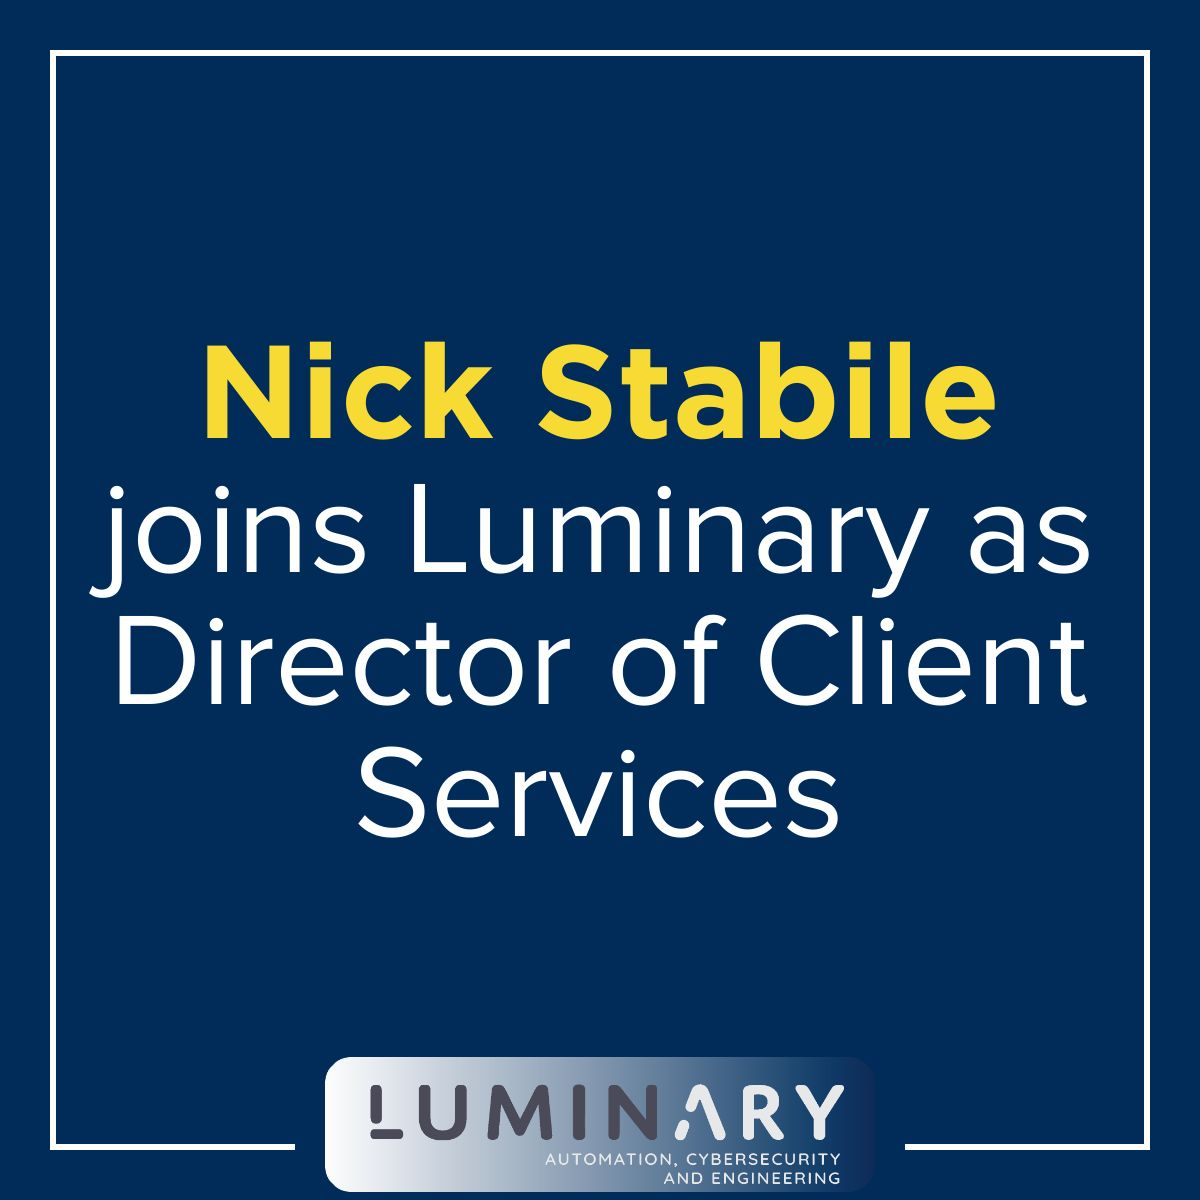 Nick Stabile joins Luminary as Director of Client Services